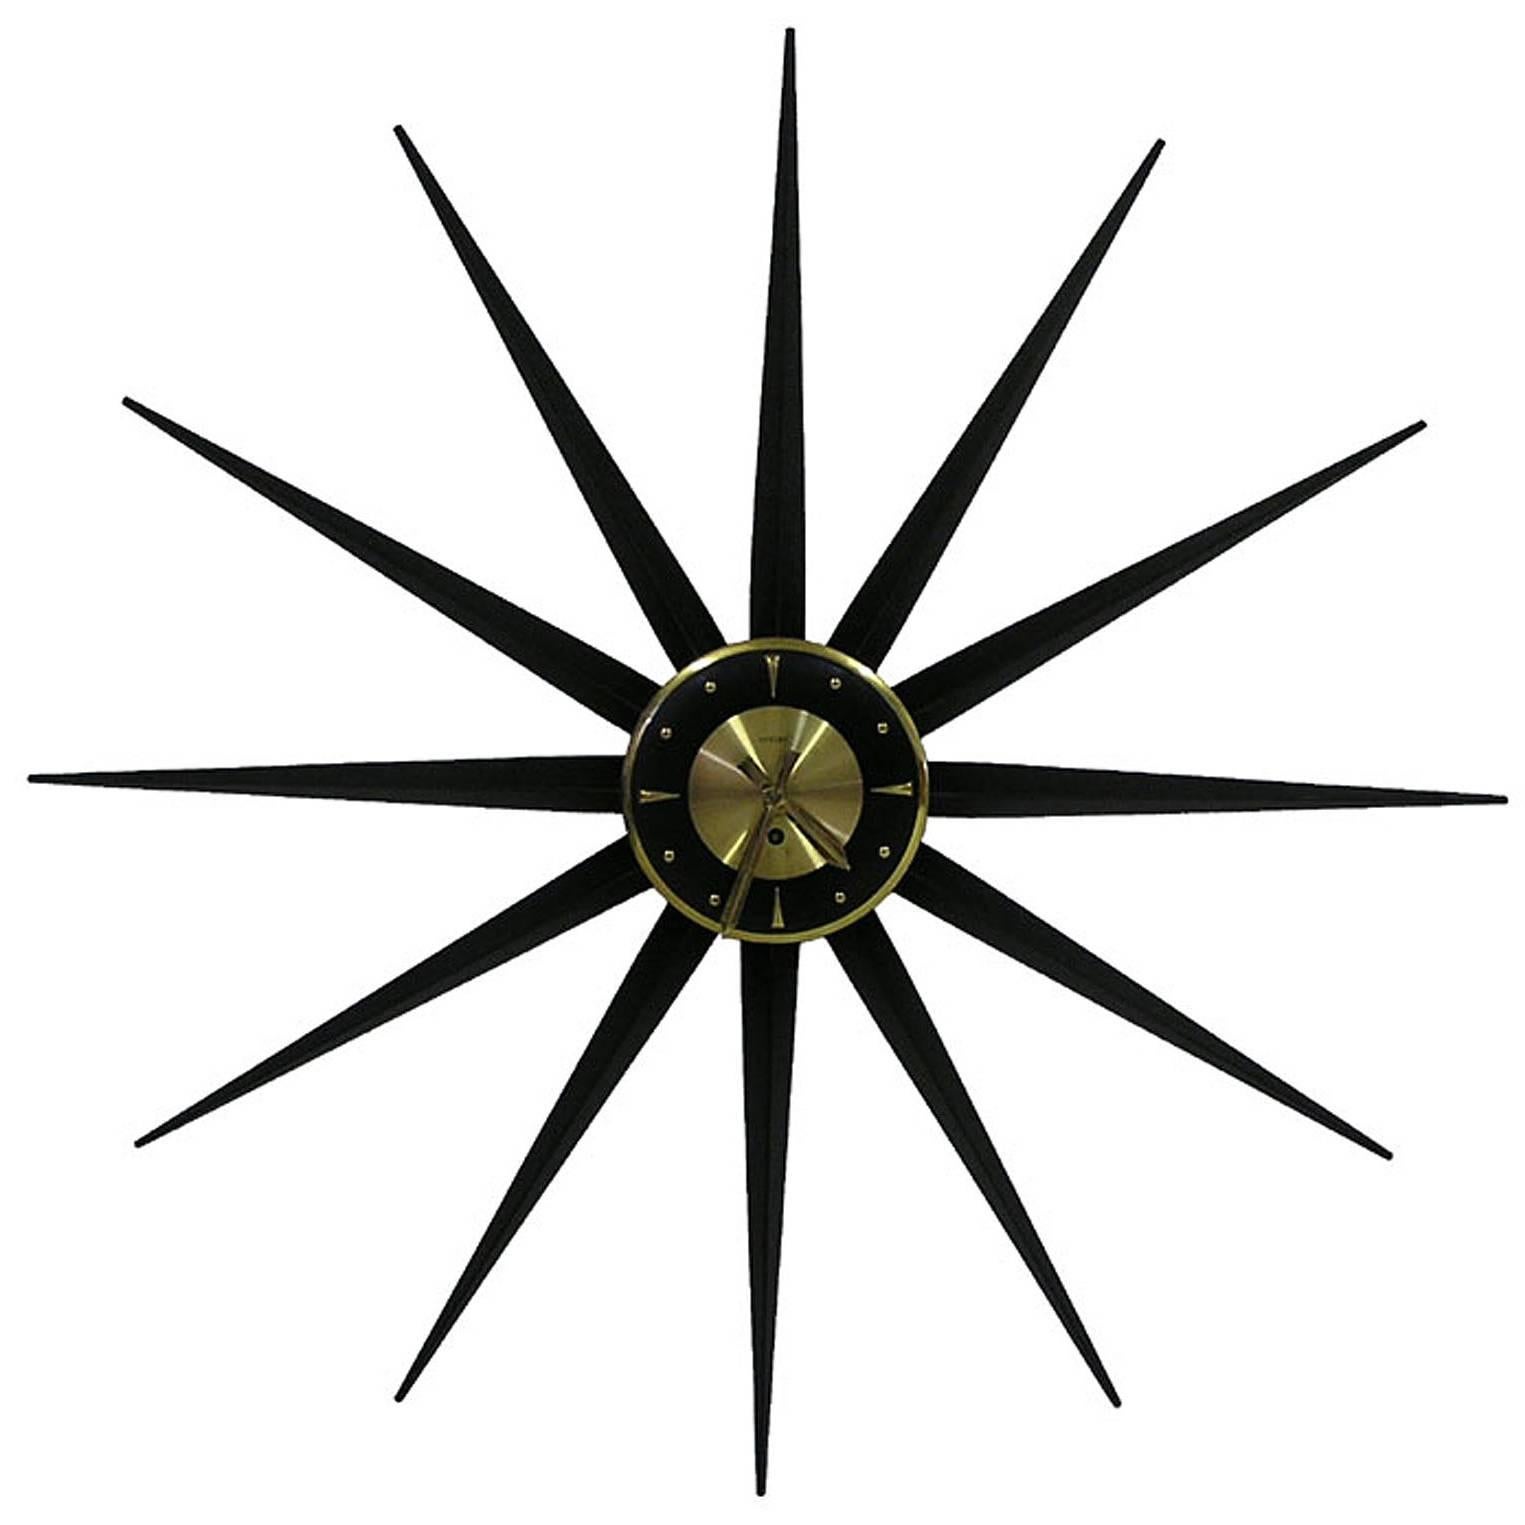 1950s "Welby" Starburst Wind-Up Metal Wall Clock, Germany